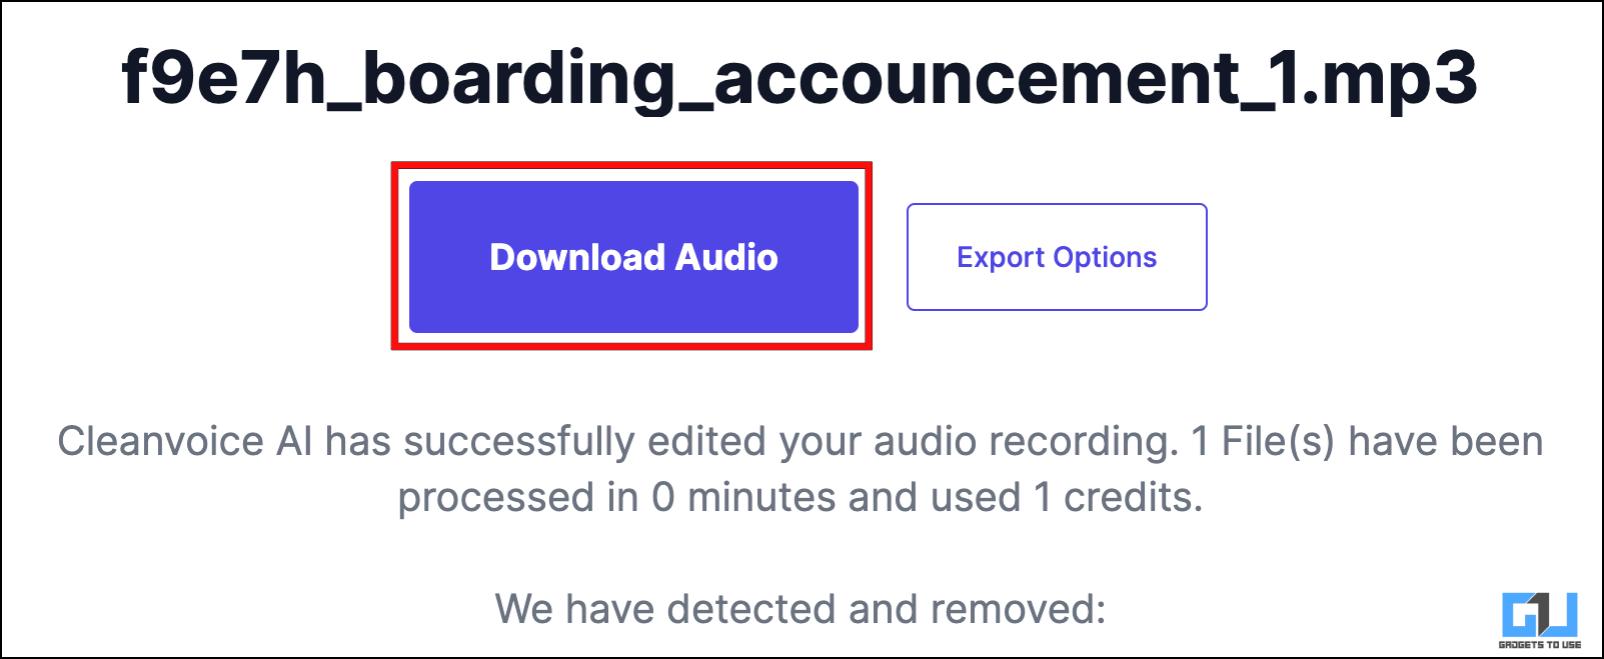 Remove Background Noise with AI